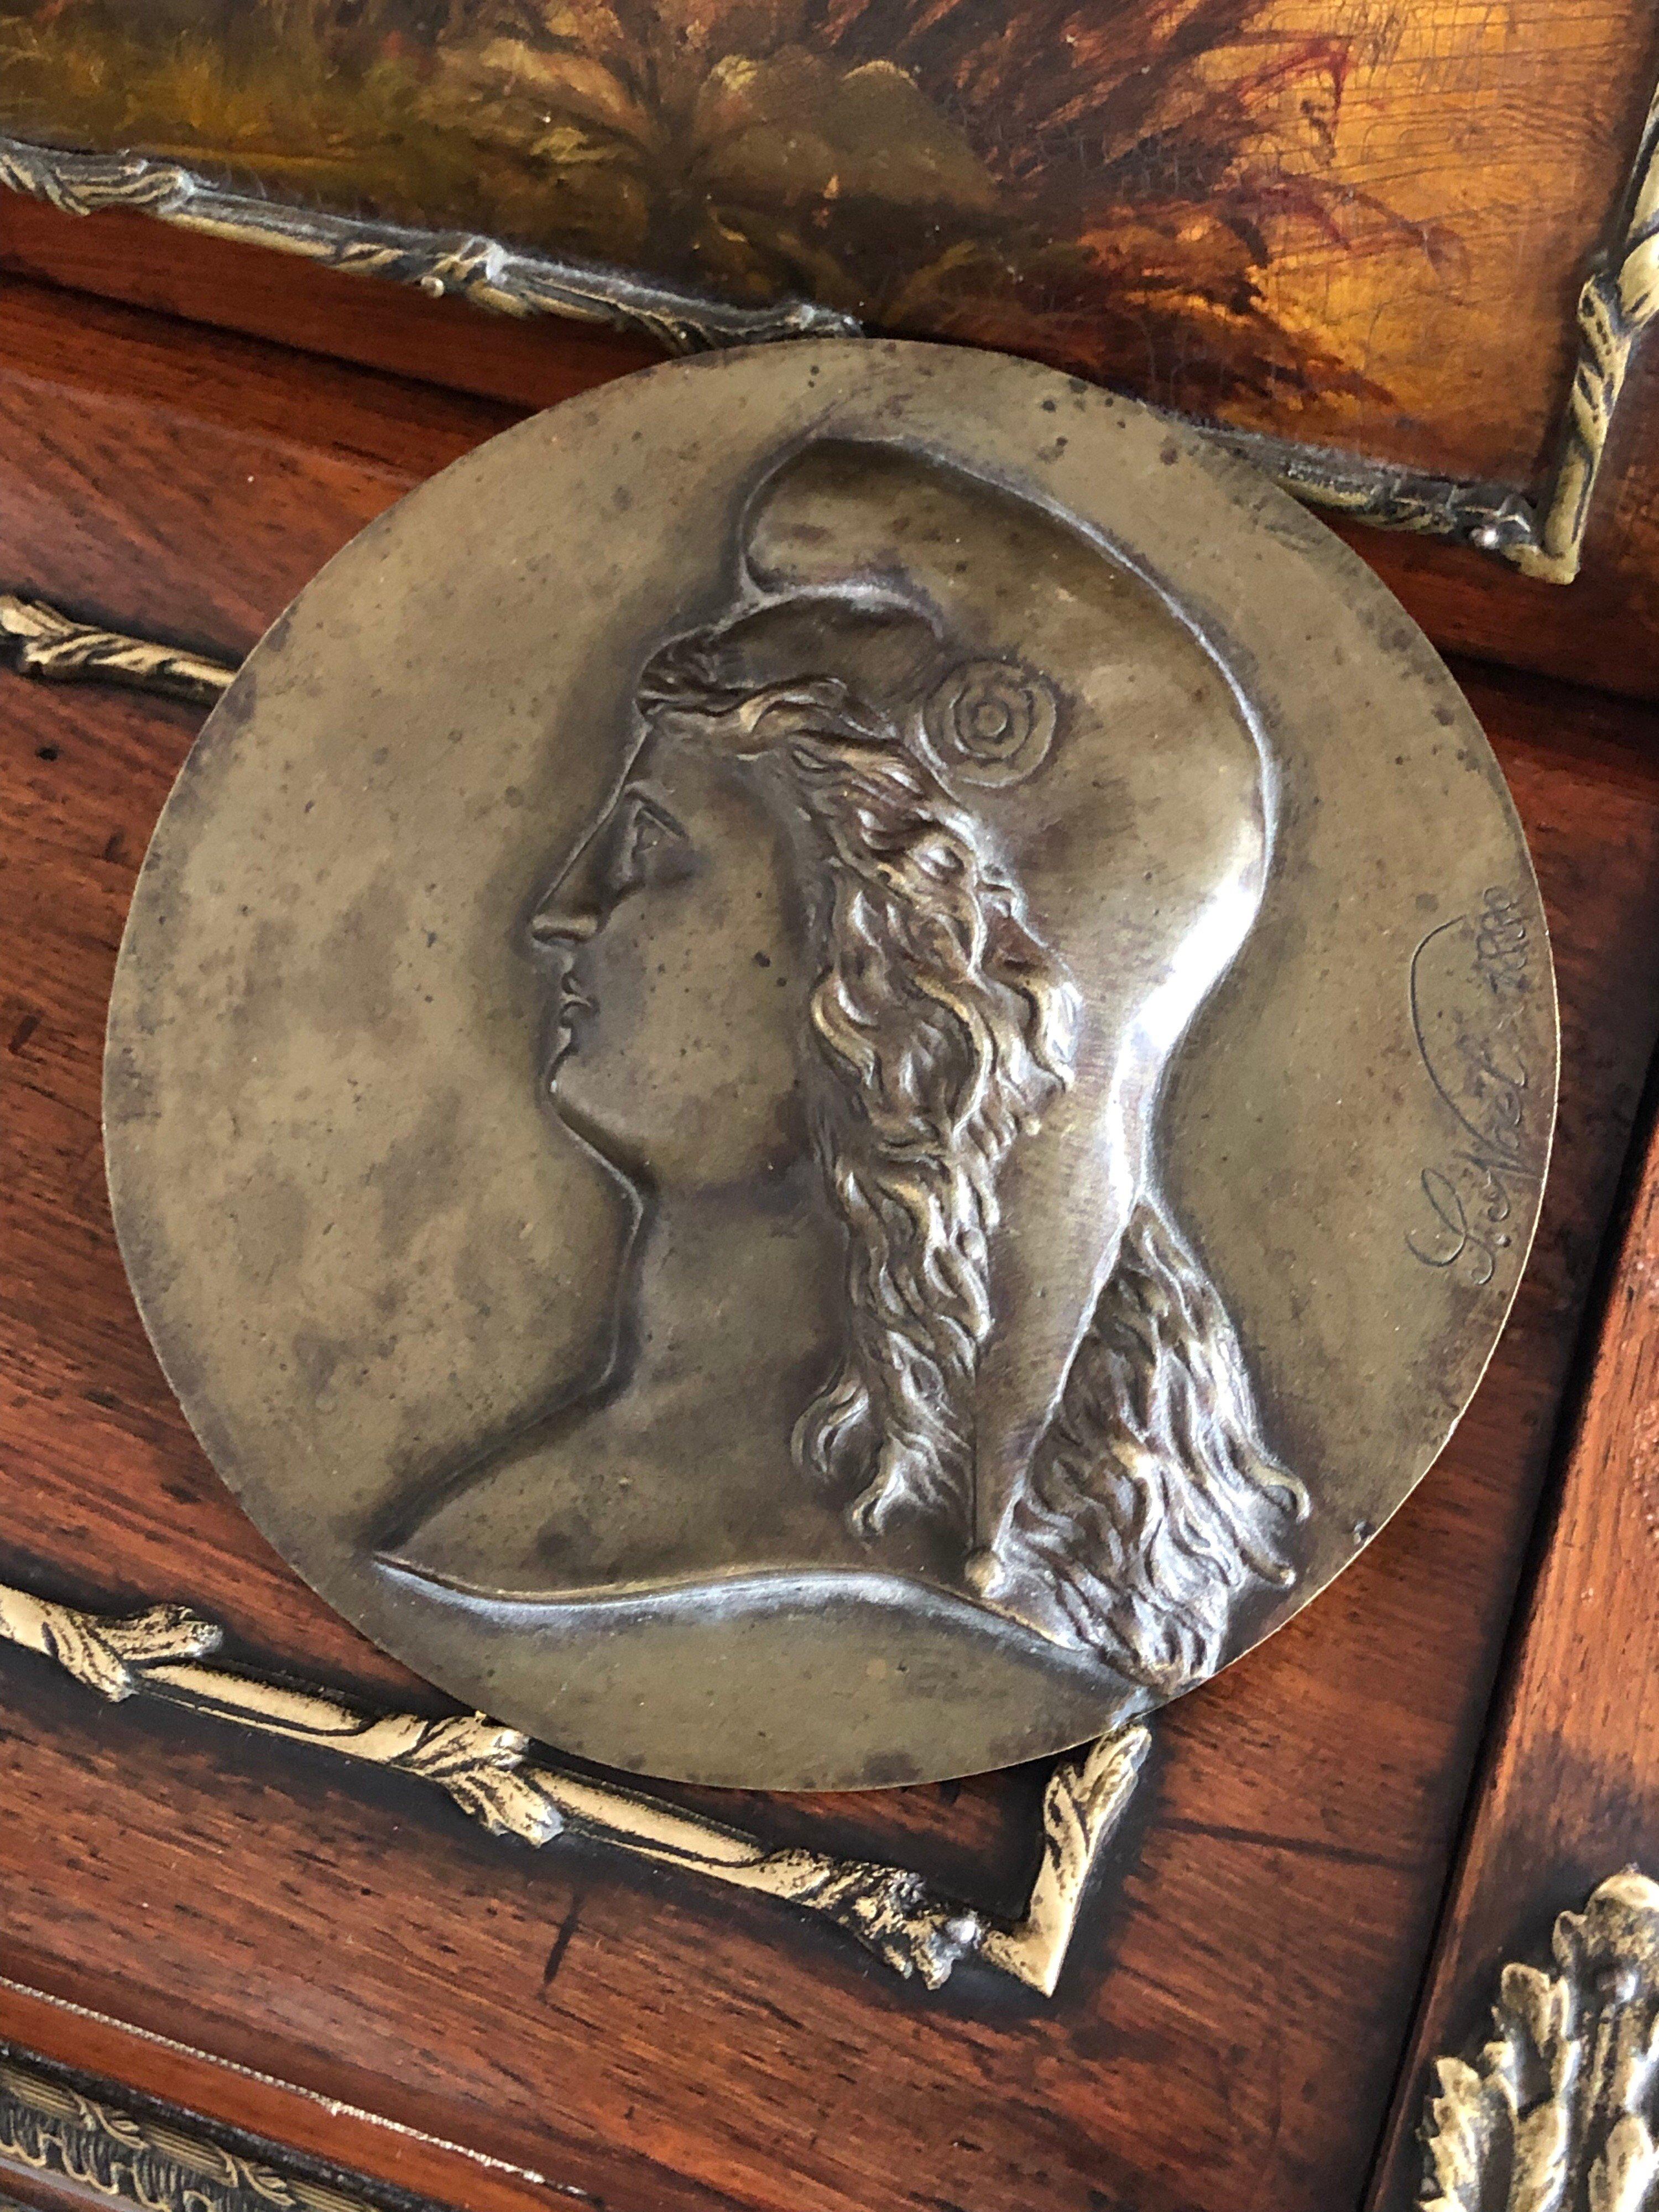 19th century bronze medallion signed by L.Noël in 1880.